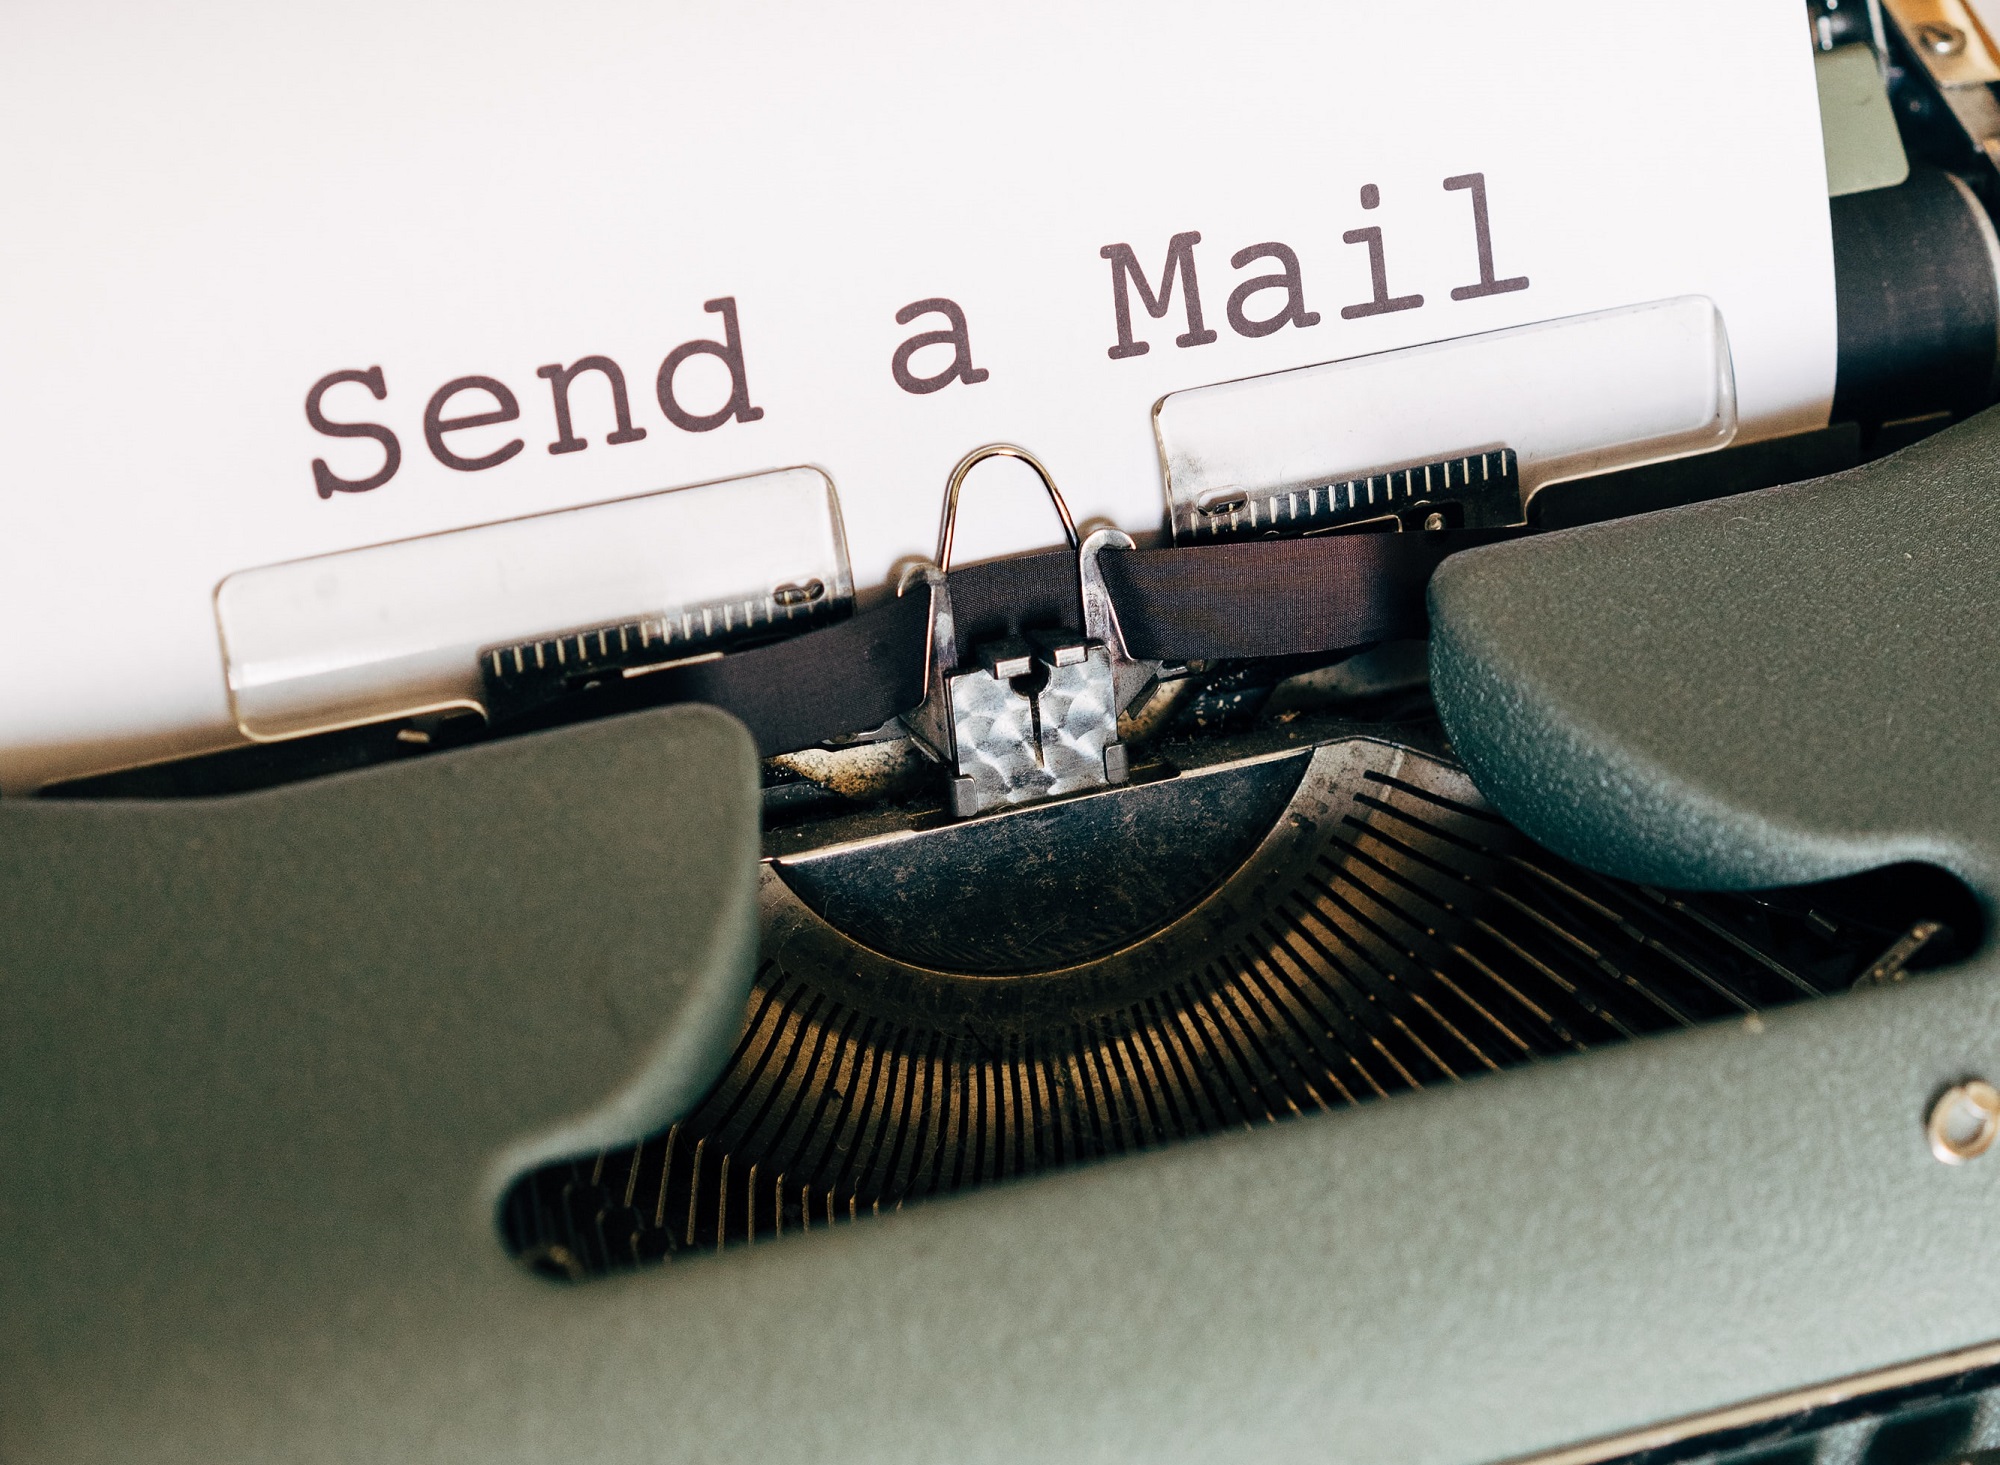 message on a paper still in the typewriter feed reads "send a mail" signifies to be straight to the point